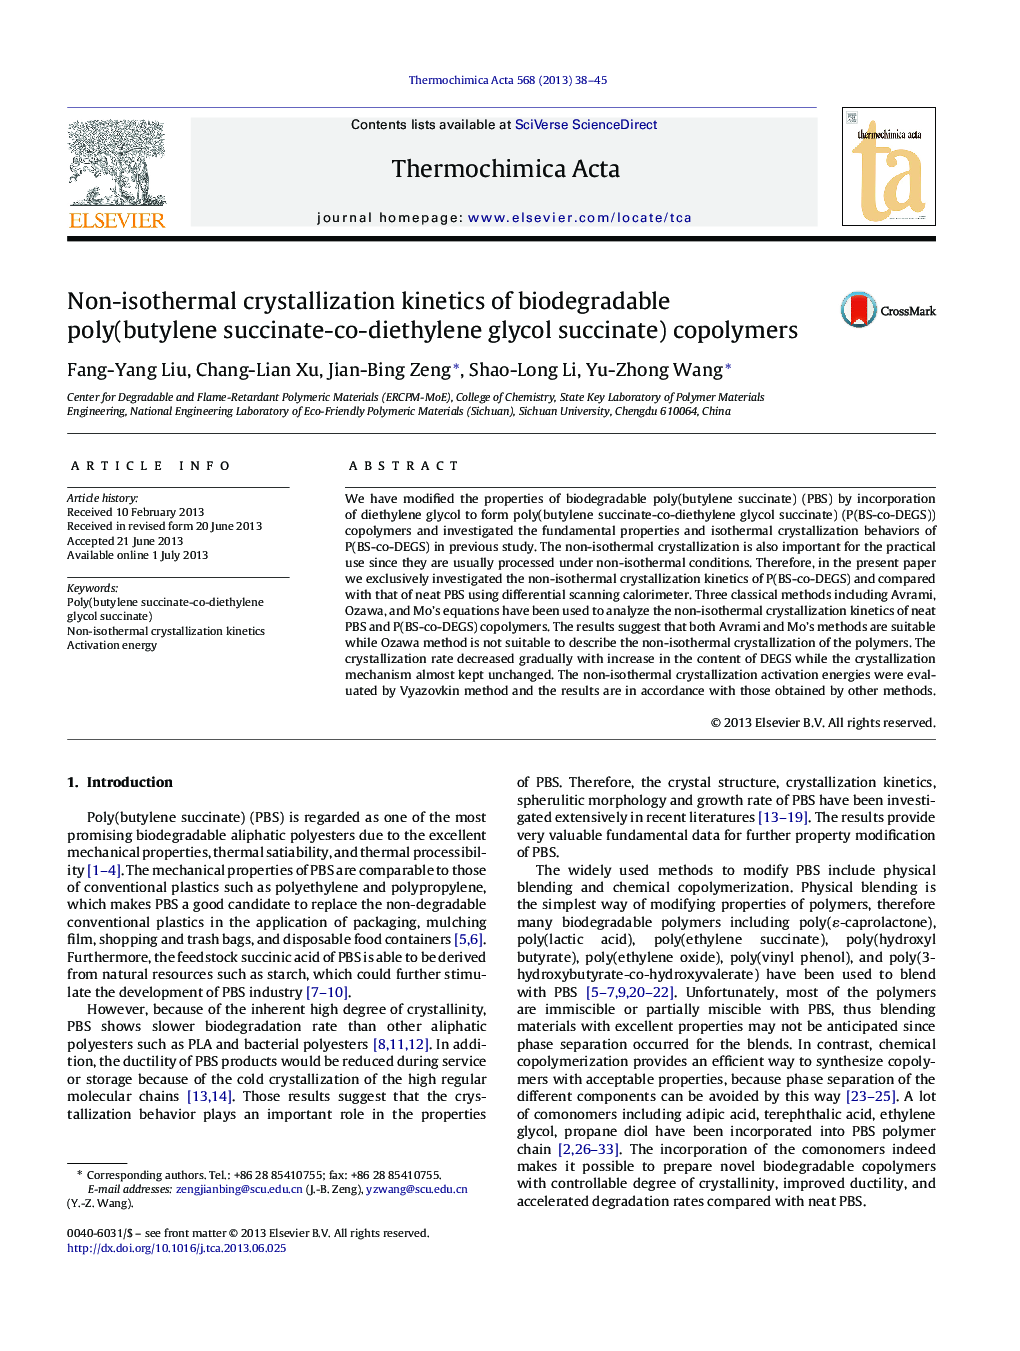 Non-isothermal crystallization kinetics of biodegradable poly(butylene succinate-co-diethylene glycol succinate) copolymers